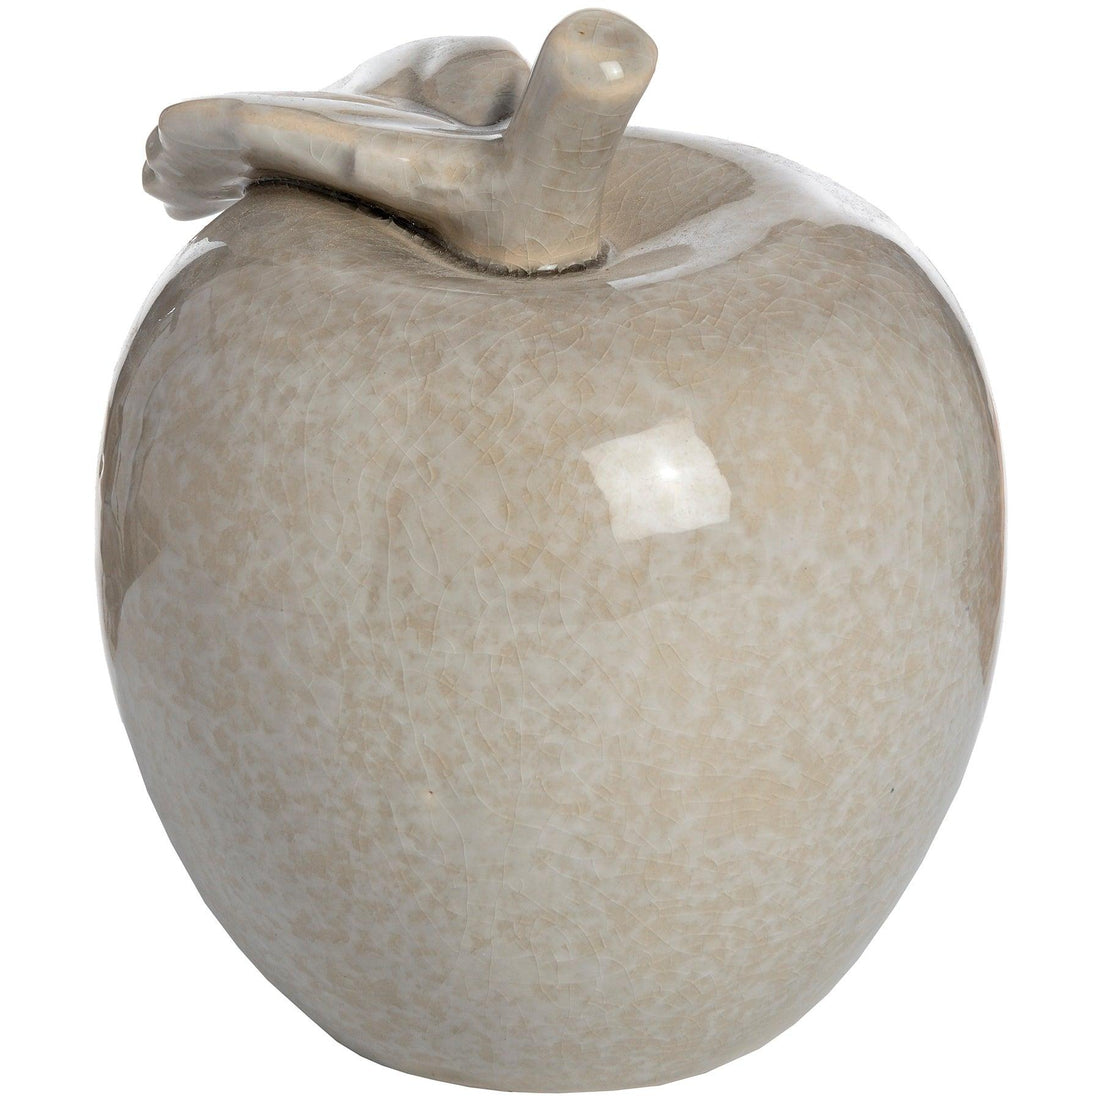 Antique Grey Small Ceramic Apple - £26.95 - Gifts & Accessories > Ornaments 